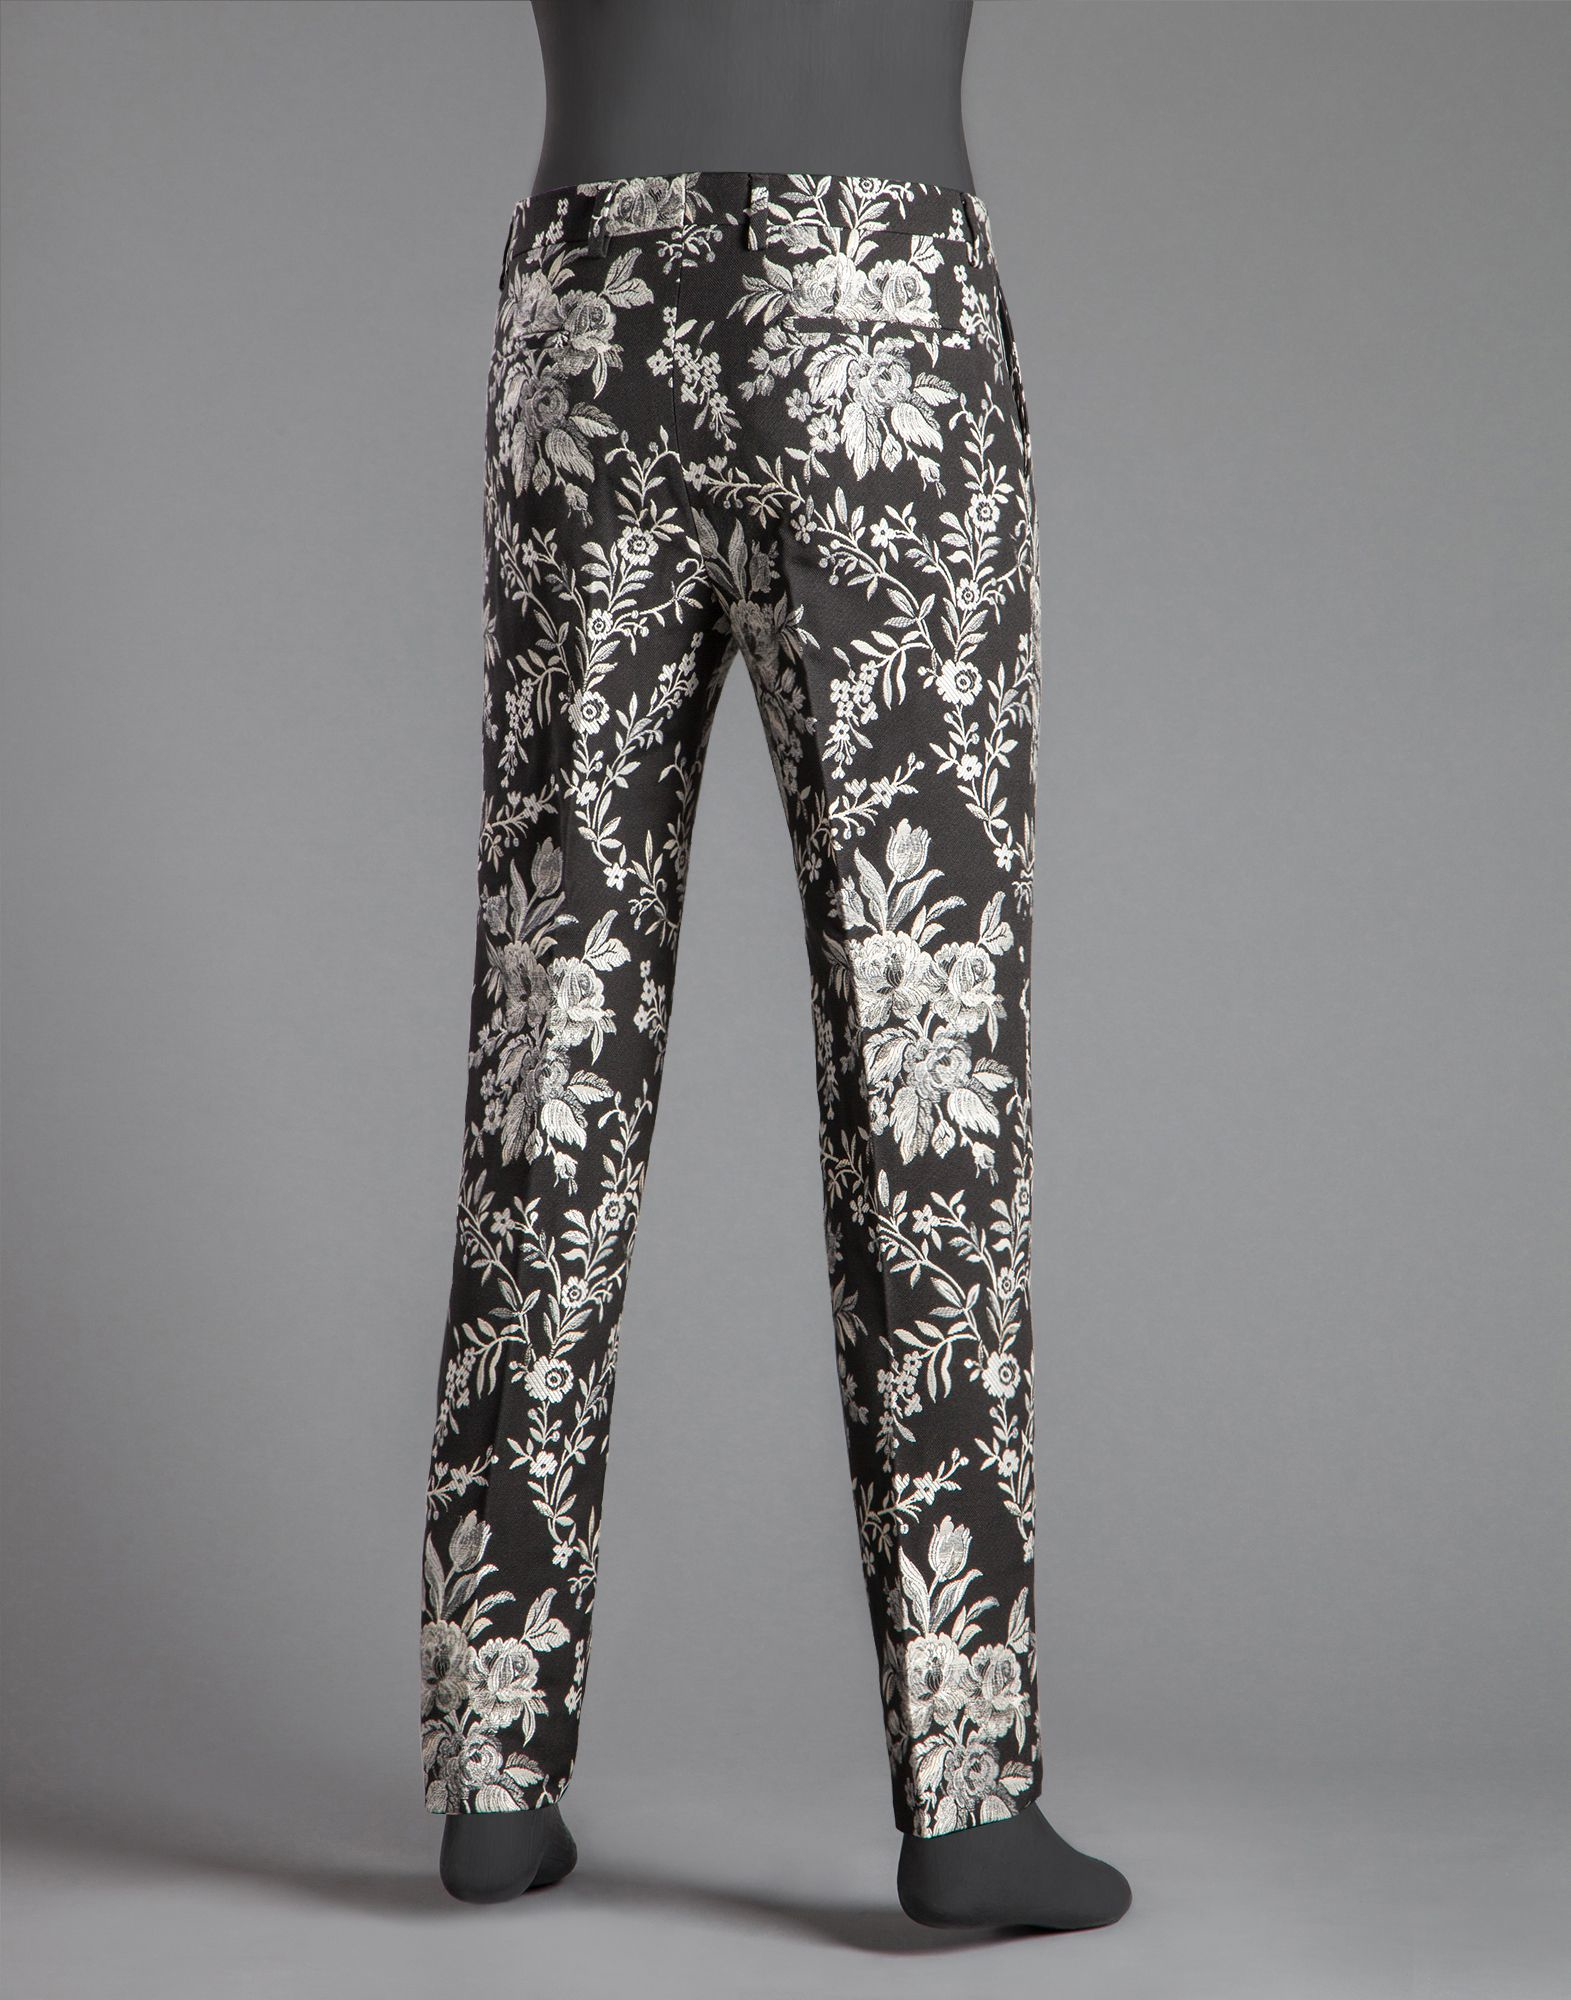 Dolce & Gabbana Floral Jacquard Trousers in Black - Lyst